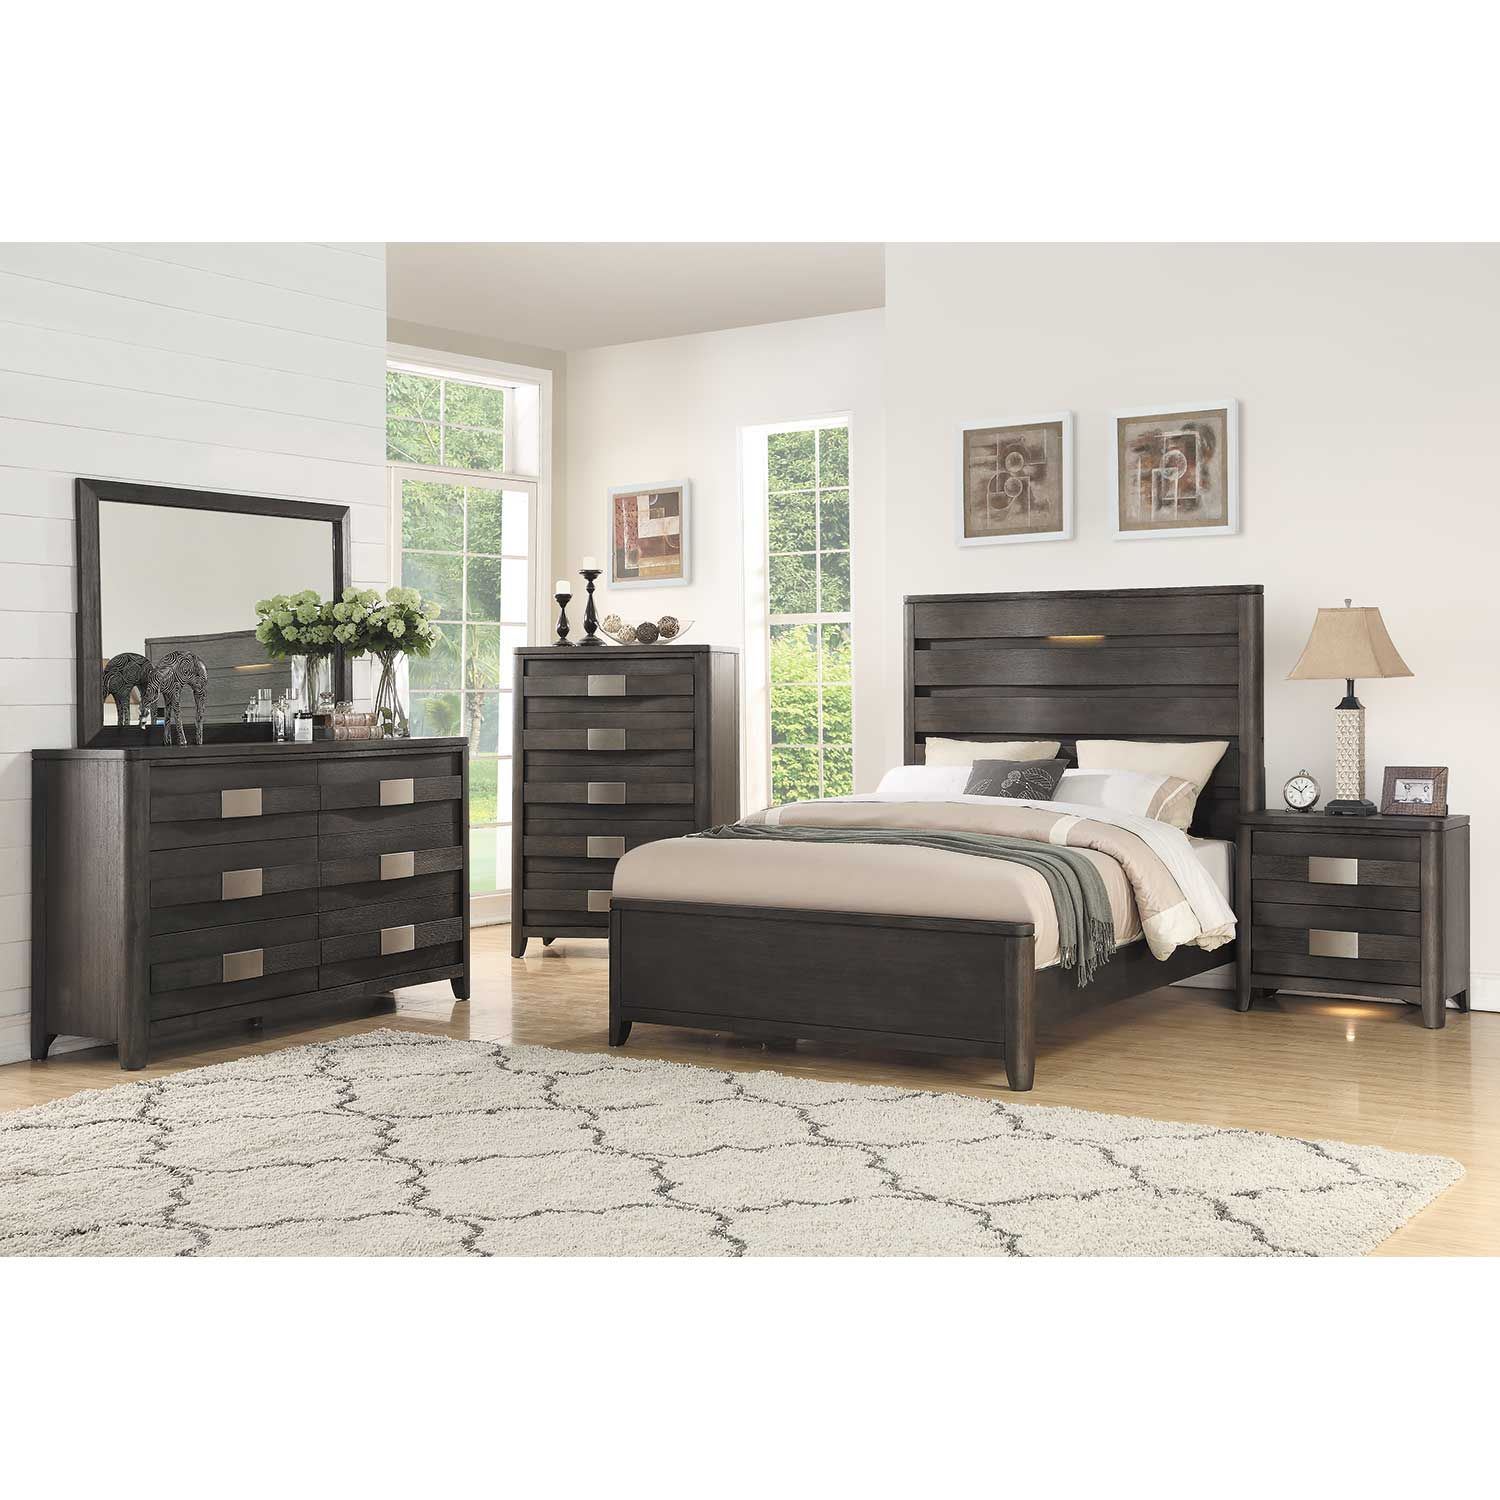 Contour 5 Piece Bedroom Set 7001 Qbed 110 510 310 410 Holland House Furniture Afw Com,What Does 400 Sq Ft Look Like